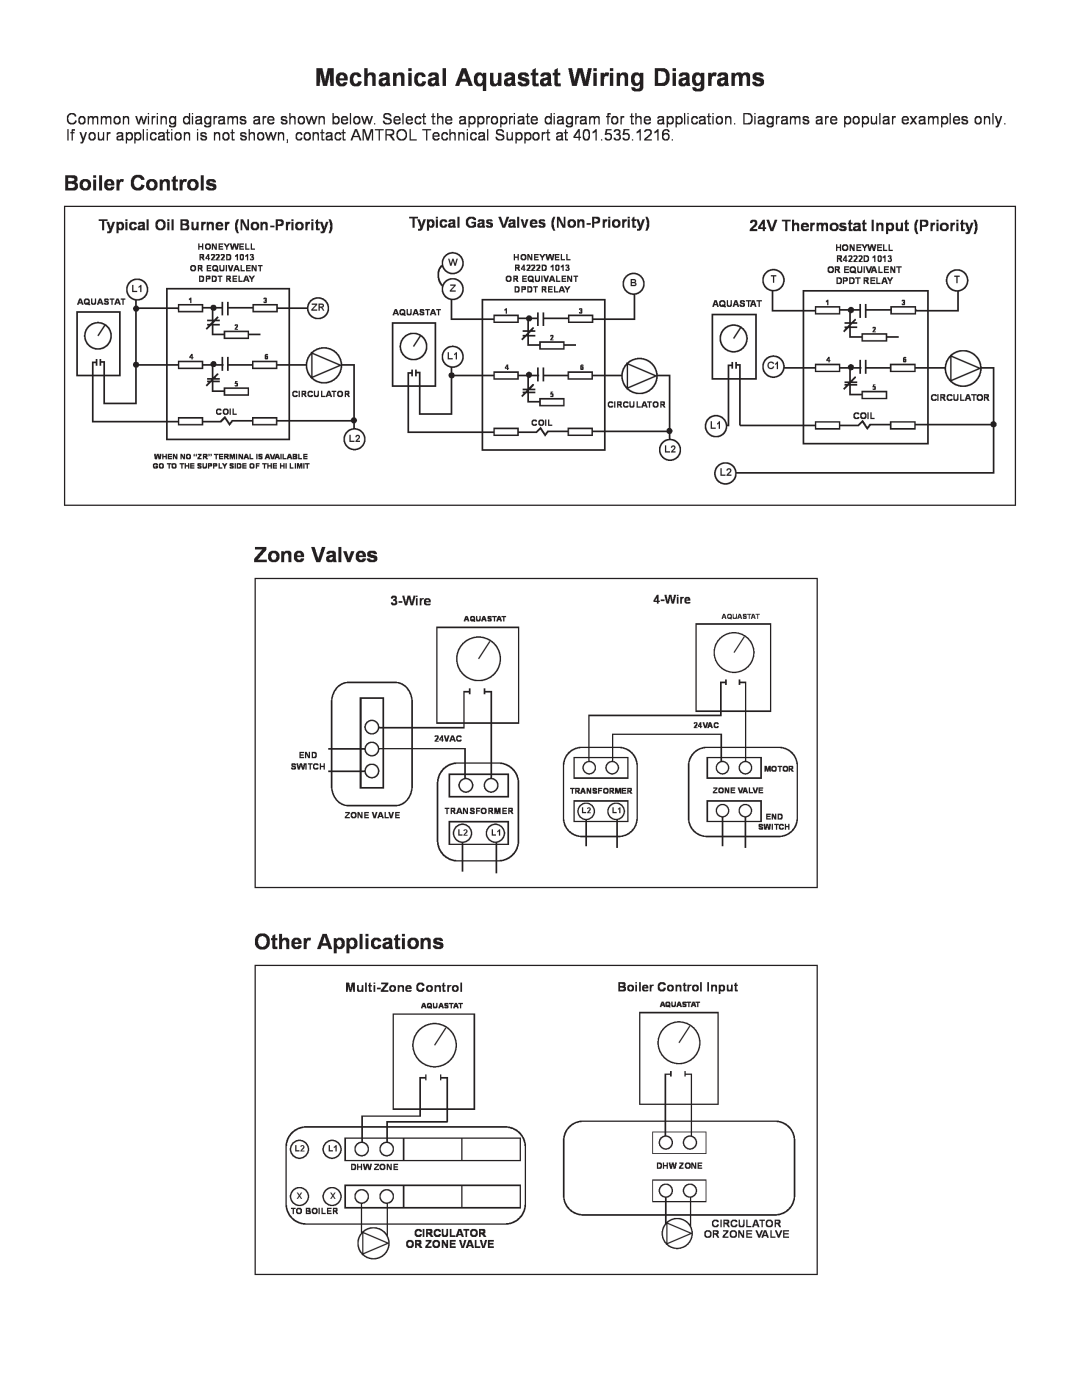 Amtrol whs-series warranty Mechanical Aquastat Wiring Diagrams, Boiler Controls, Zone Valves, Other Applications, Wire 